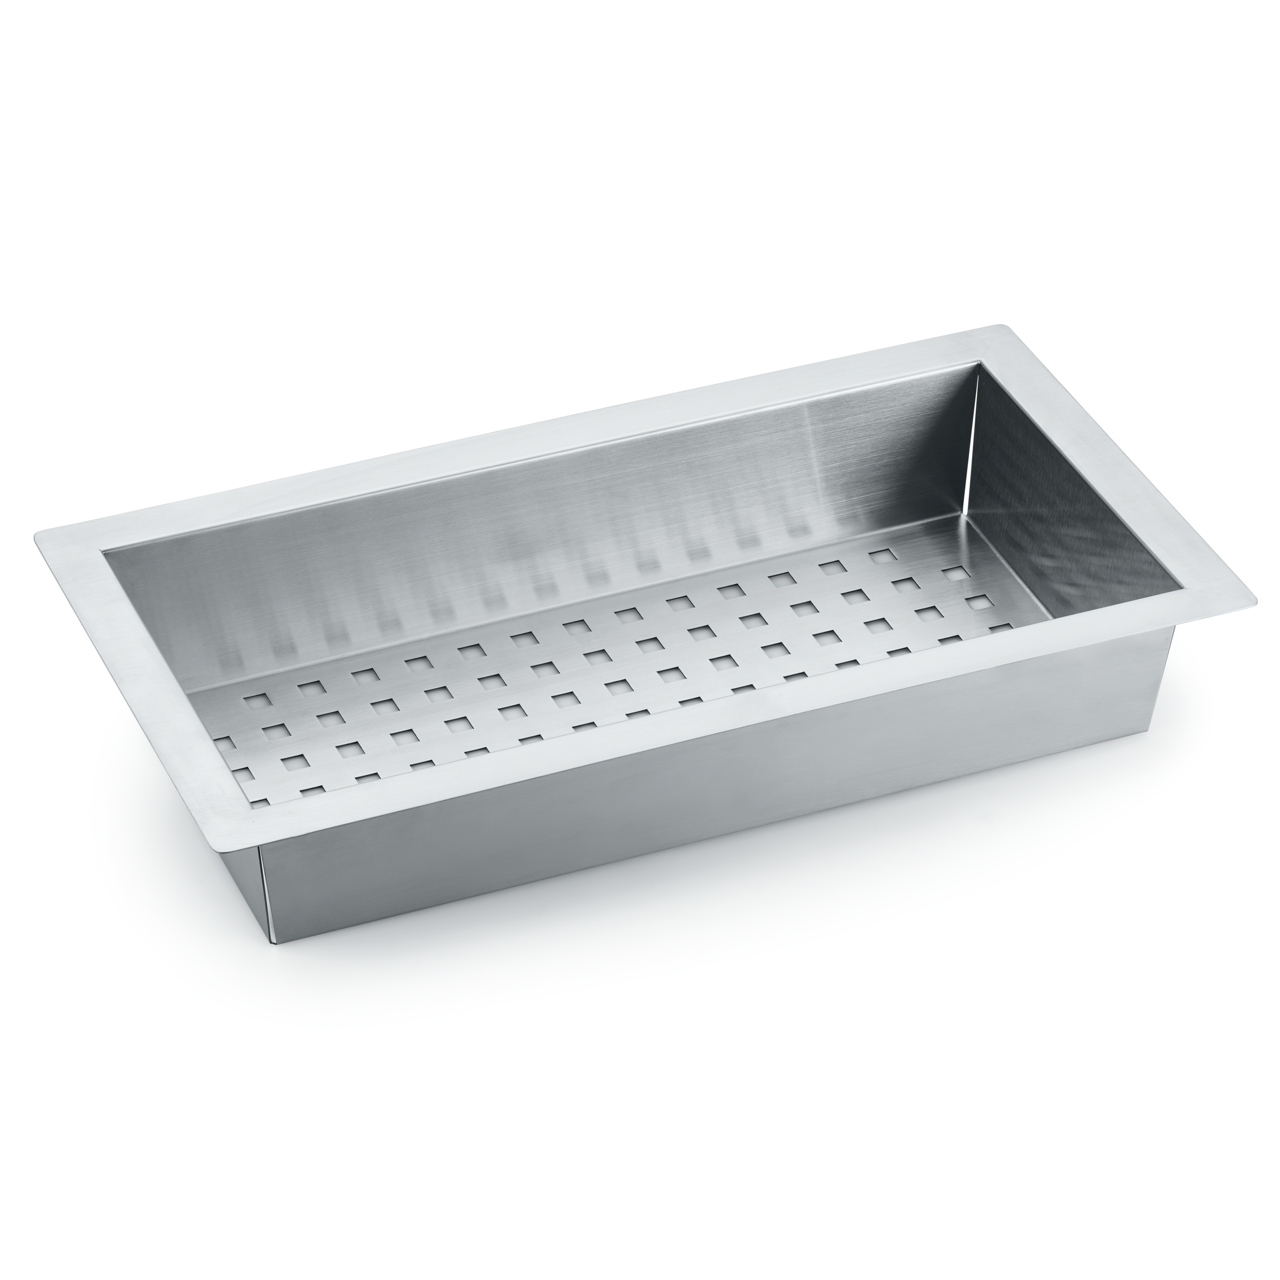  Drip tray made of stainless steel, 466 x 252 mm